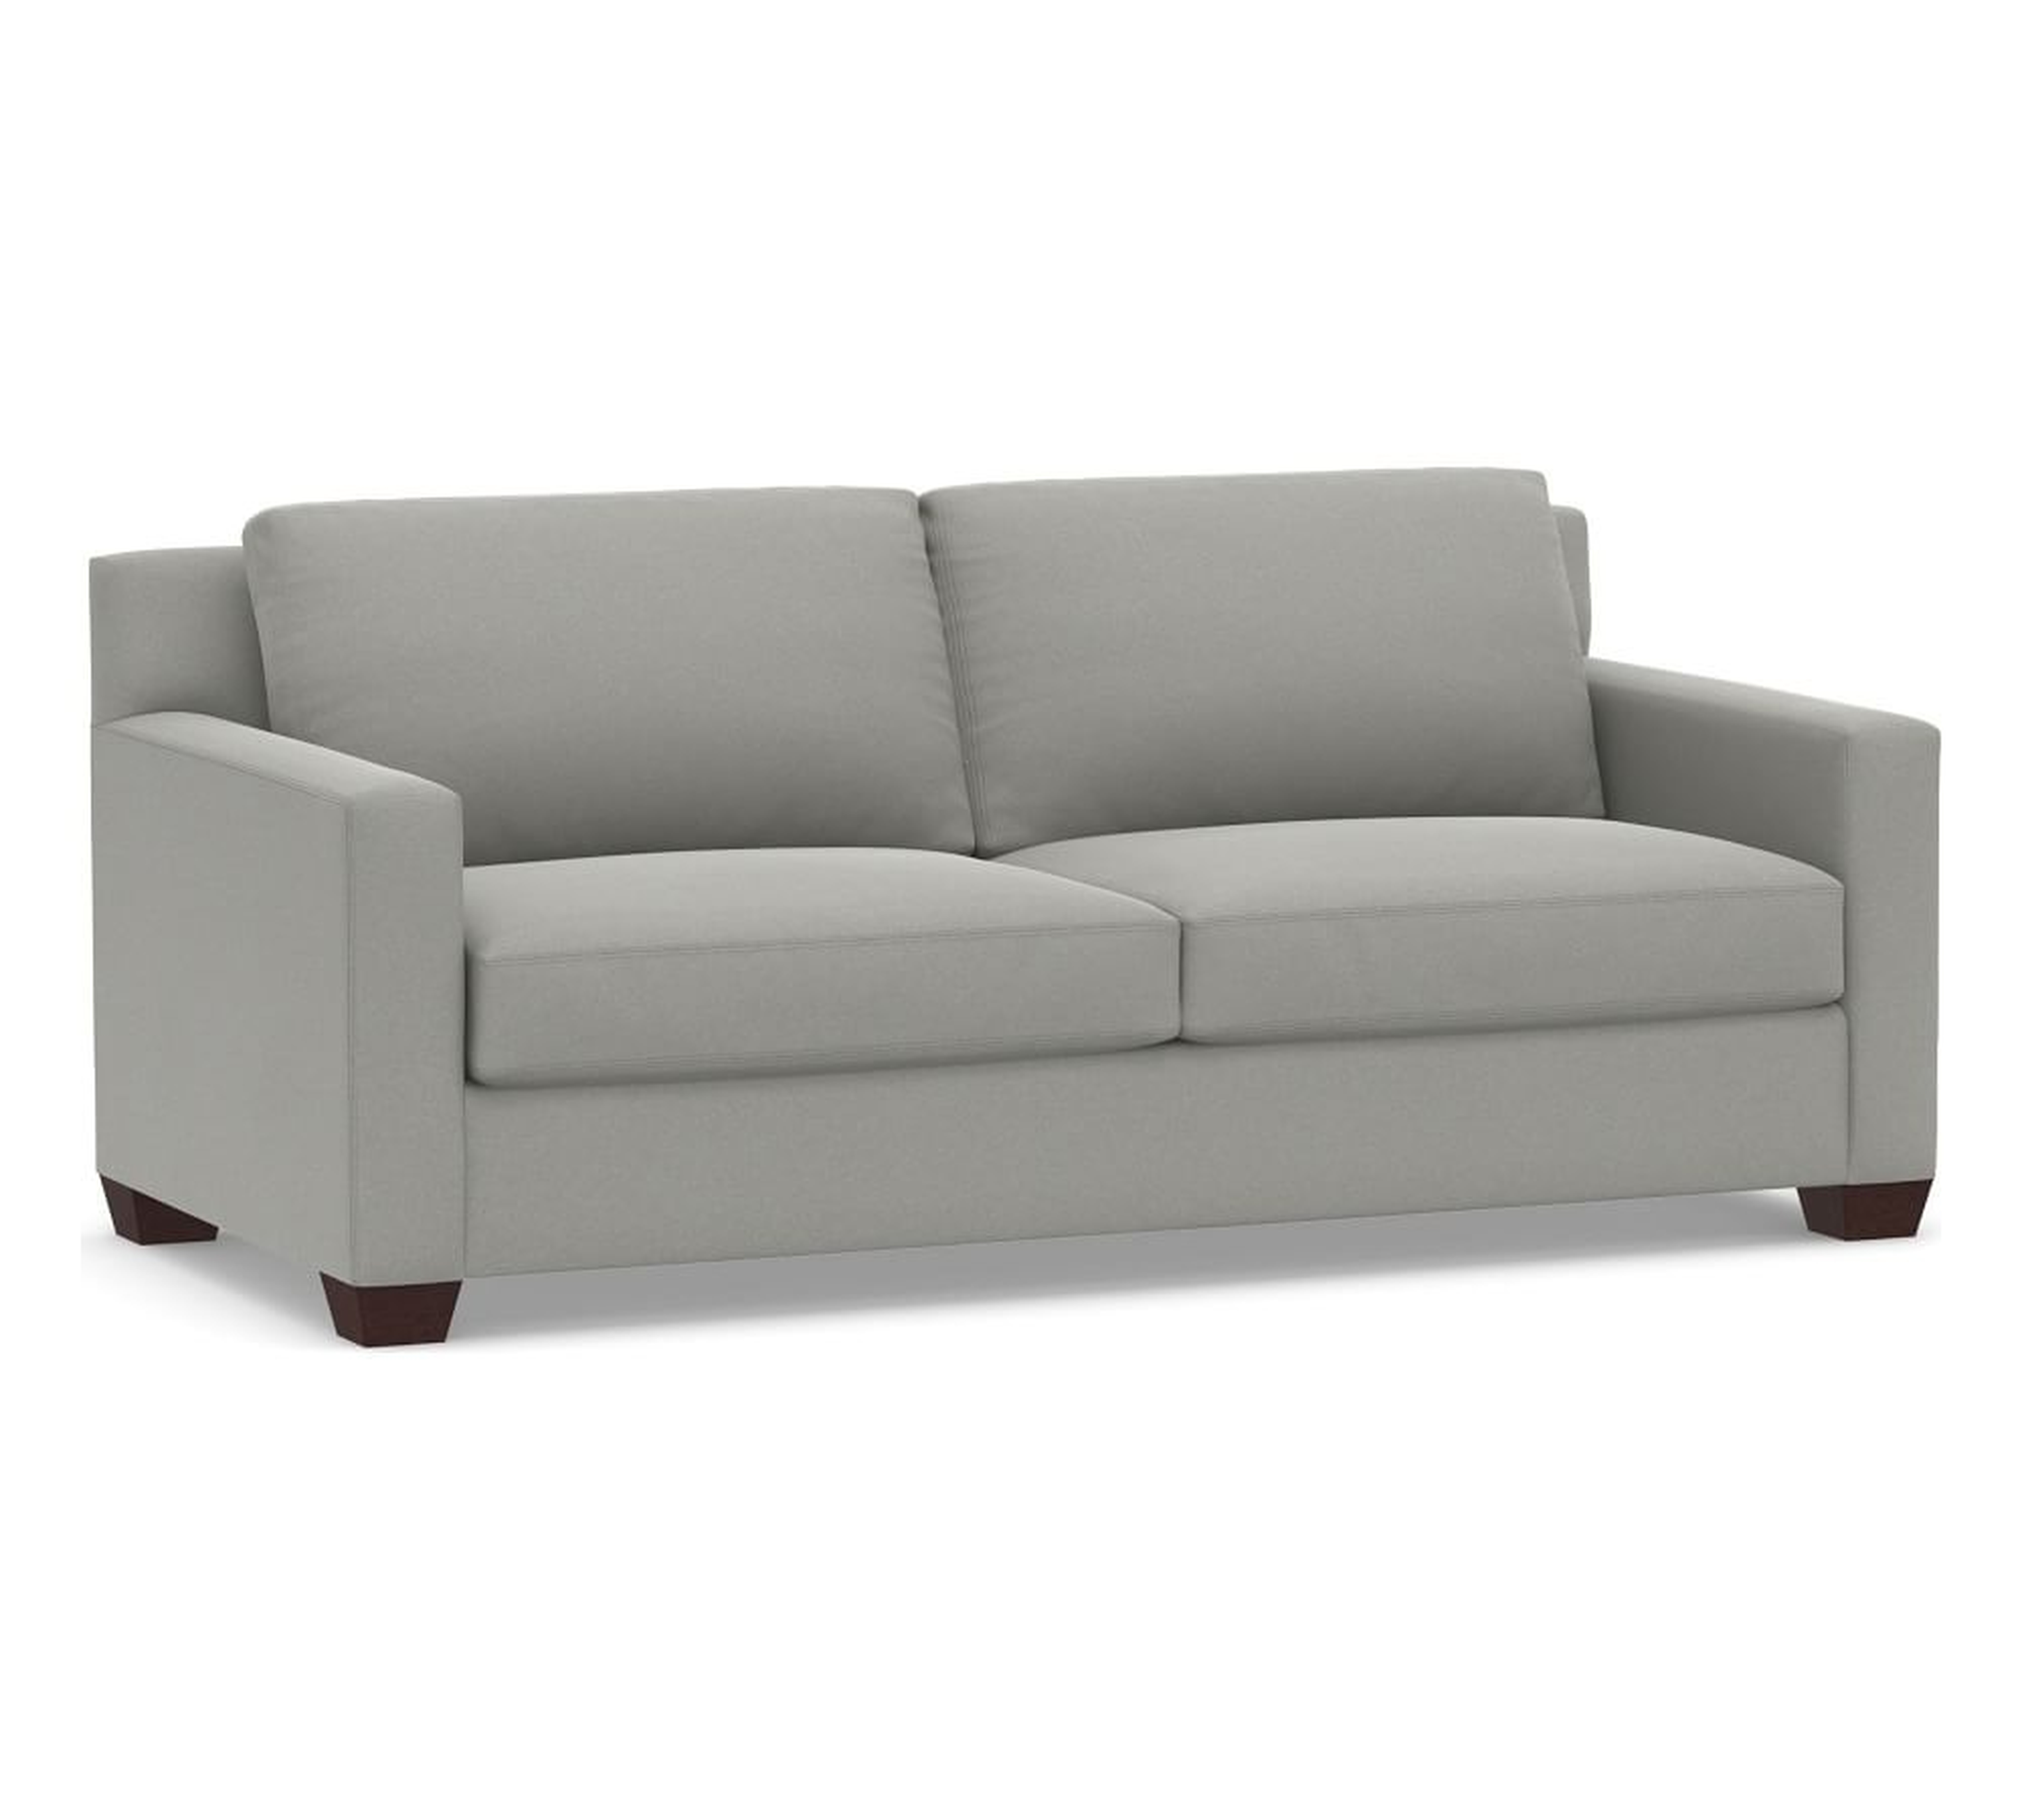 York Square Arm Upholstered Sofa 80.5", Down Blend Wrapped Cushions, Performance Suede Metal Gray - Pottery Barn